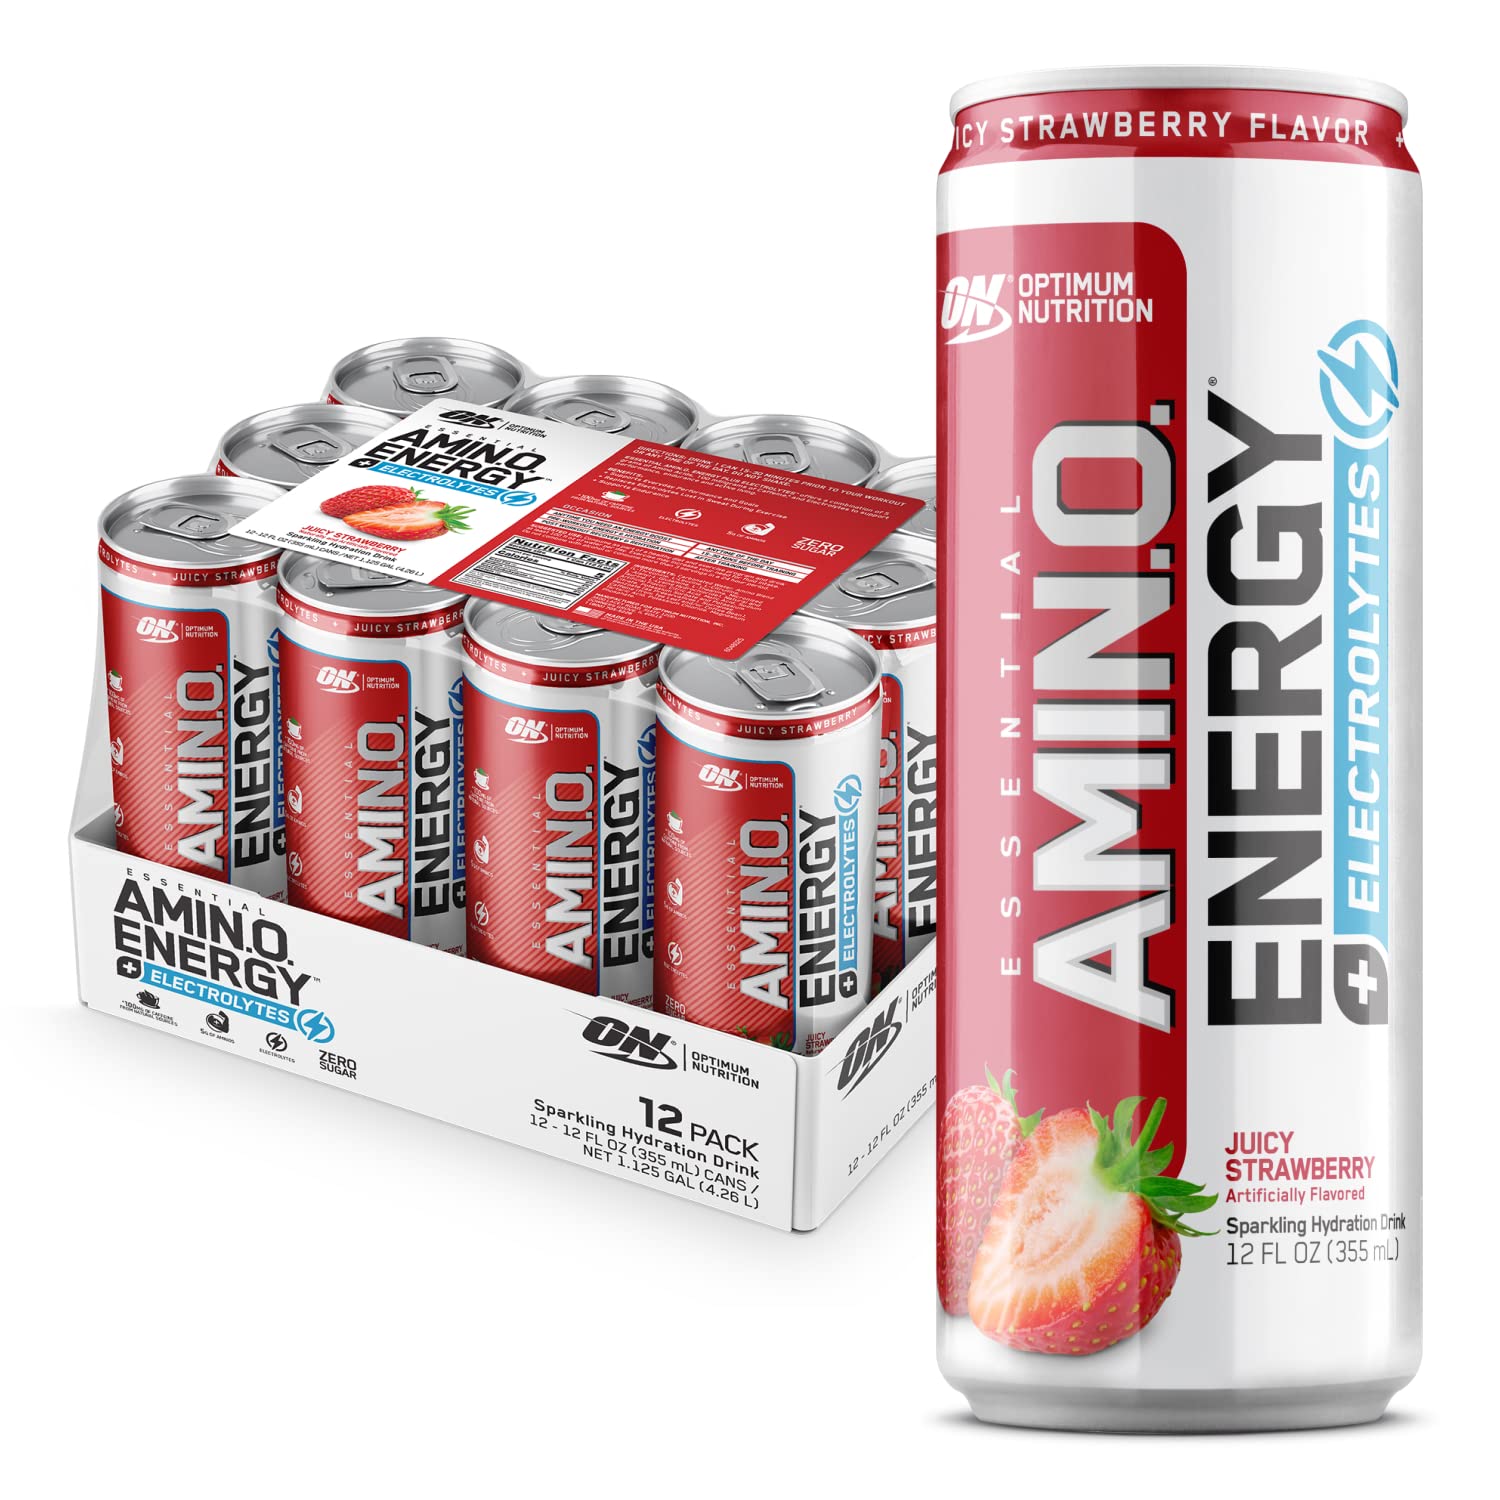 Optimum Nutrition Amino Energy Drink + Electrolytes for Hydration - Sugar Free, Amino Acids, BCAA, Keto Friendly, Sparkling Drink - Juicy Strawberry, Pack of 12 (Packaging May Vary)